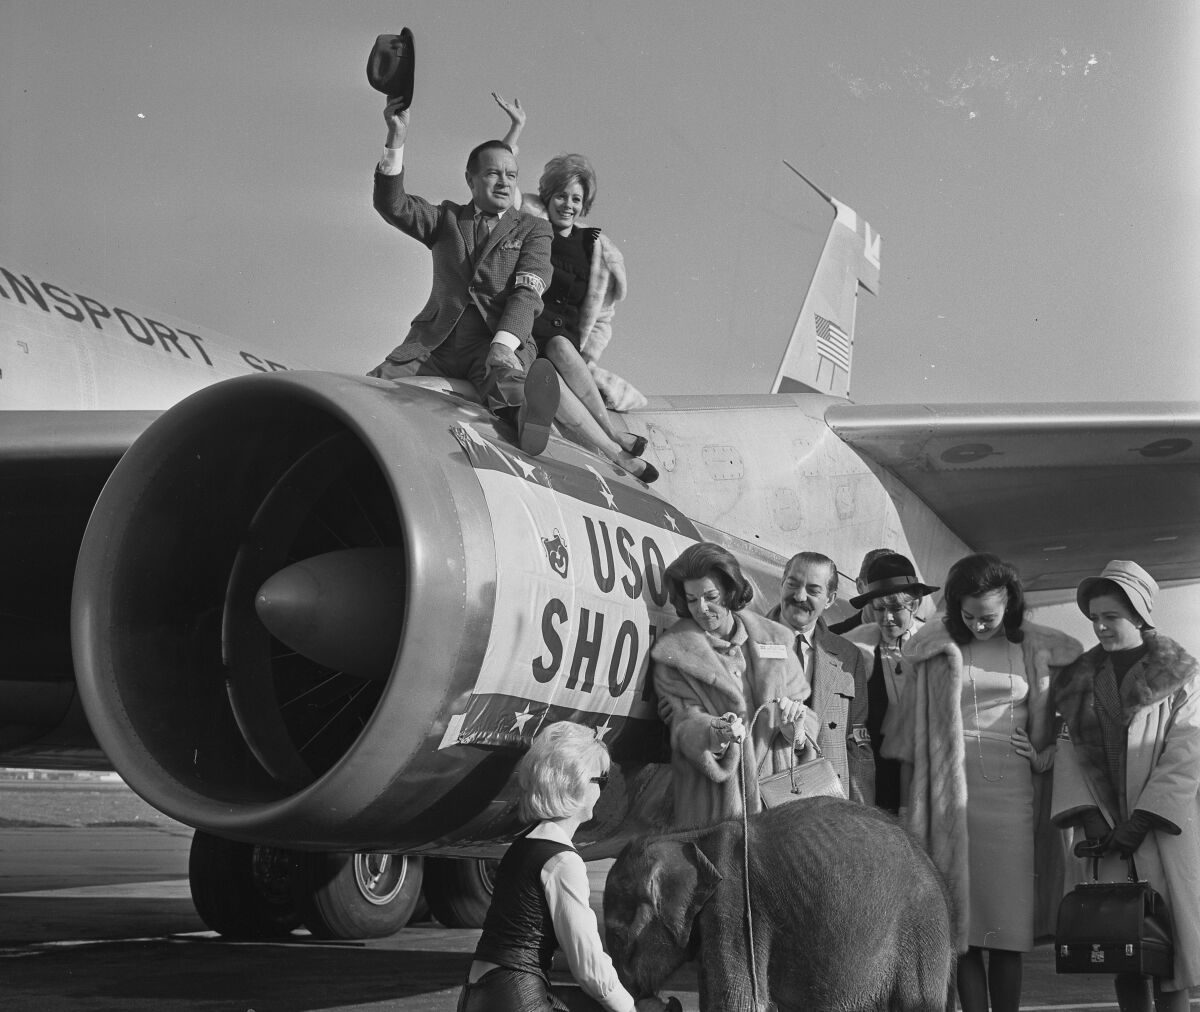 A man waves a fedora while atop a jet engine with a waving woman. Several people stand below with a baby elephant.